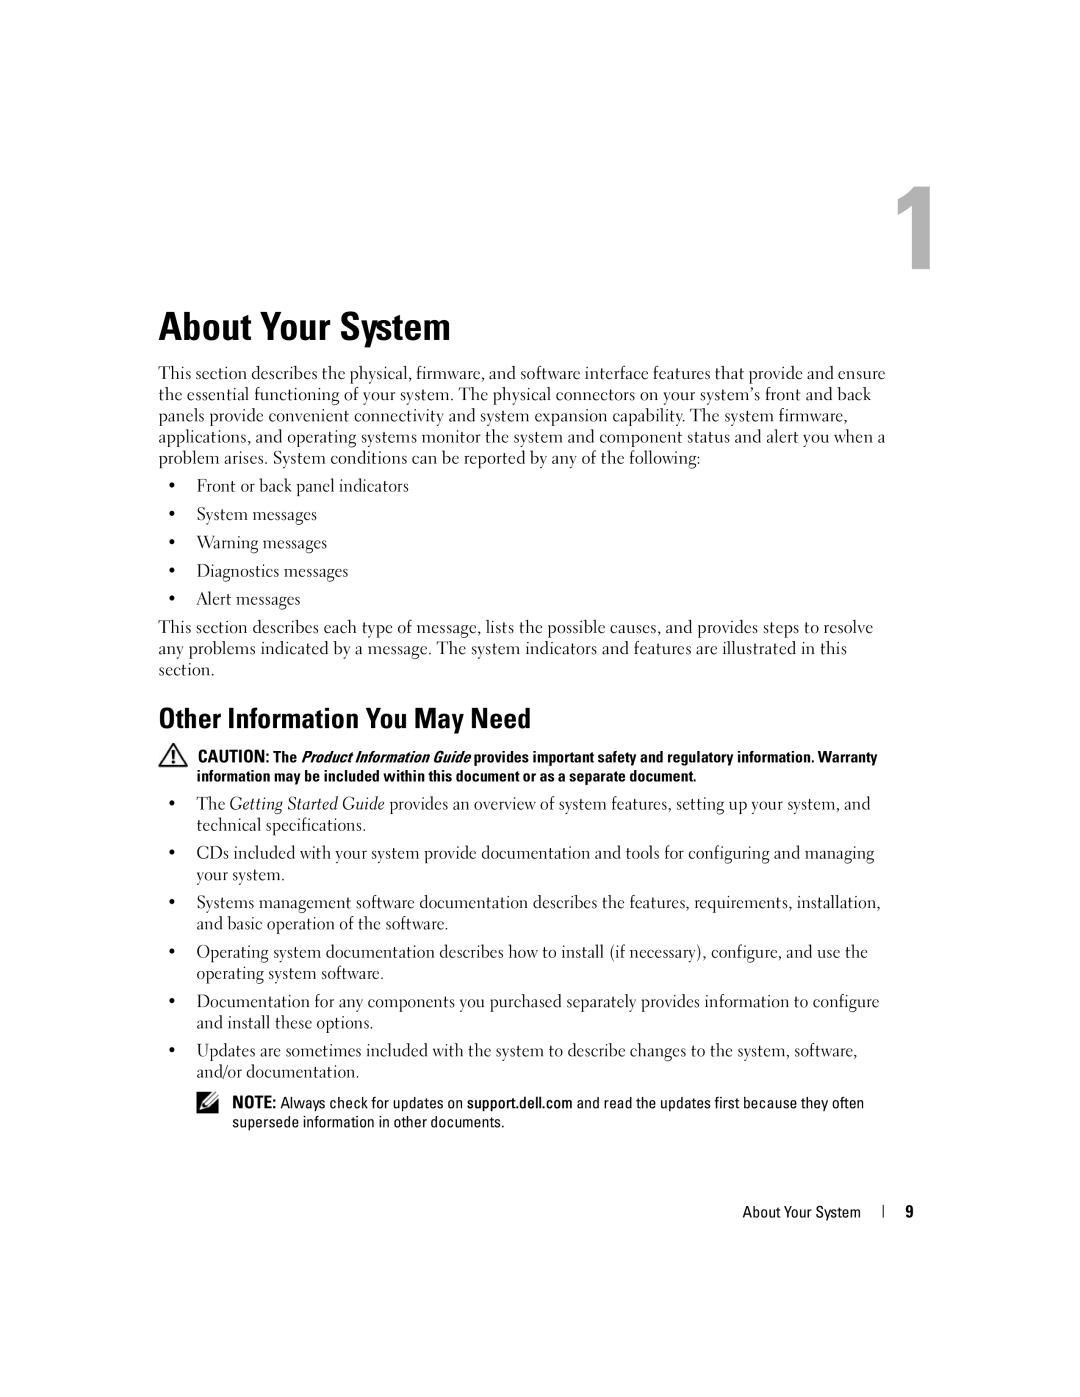 Dell 1900 owner manual Other Information You May Need, About Your System 